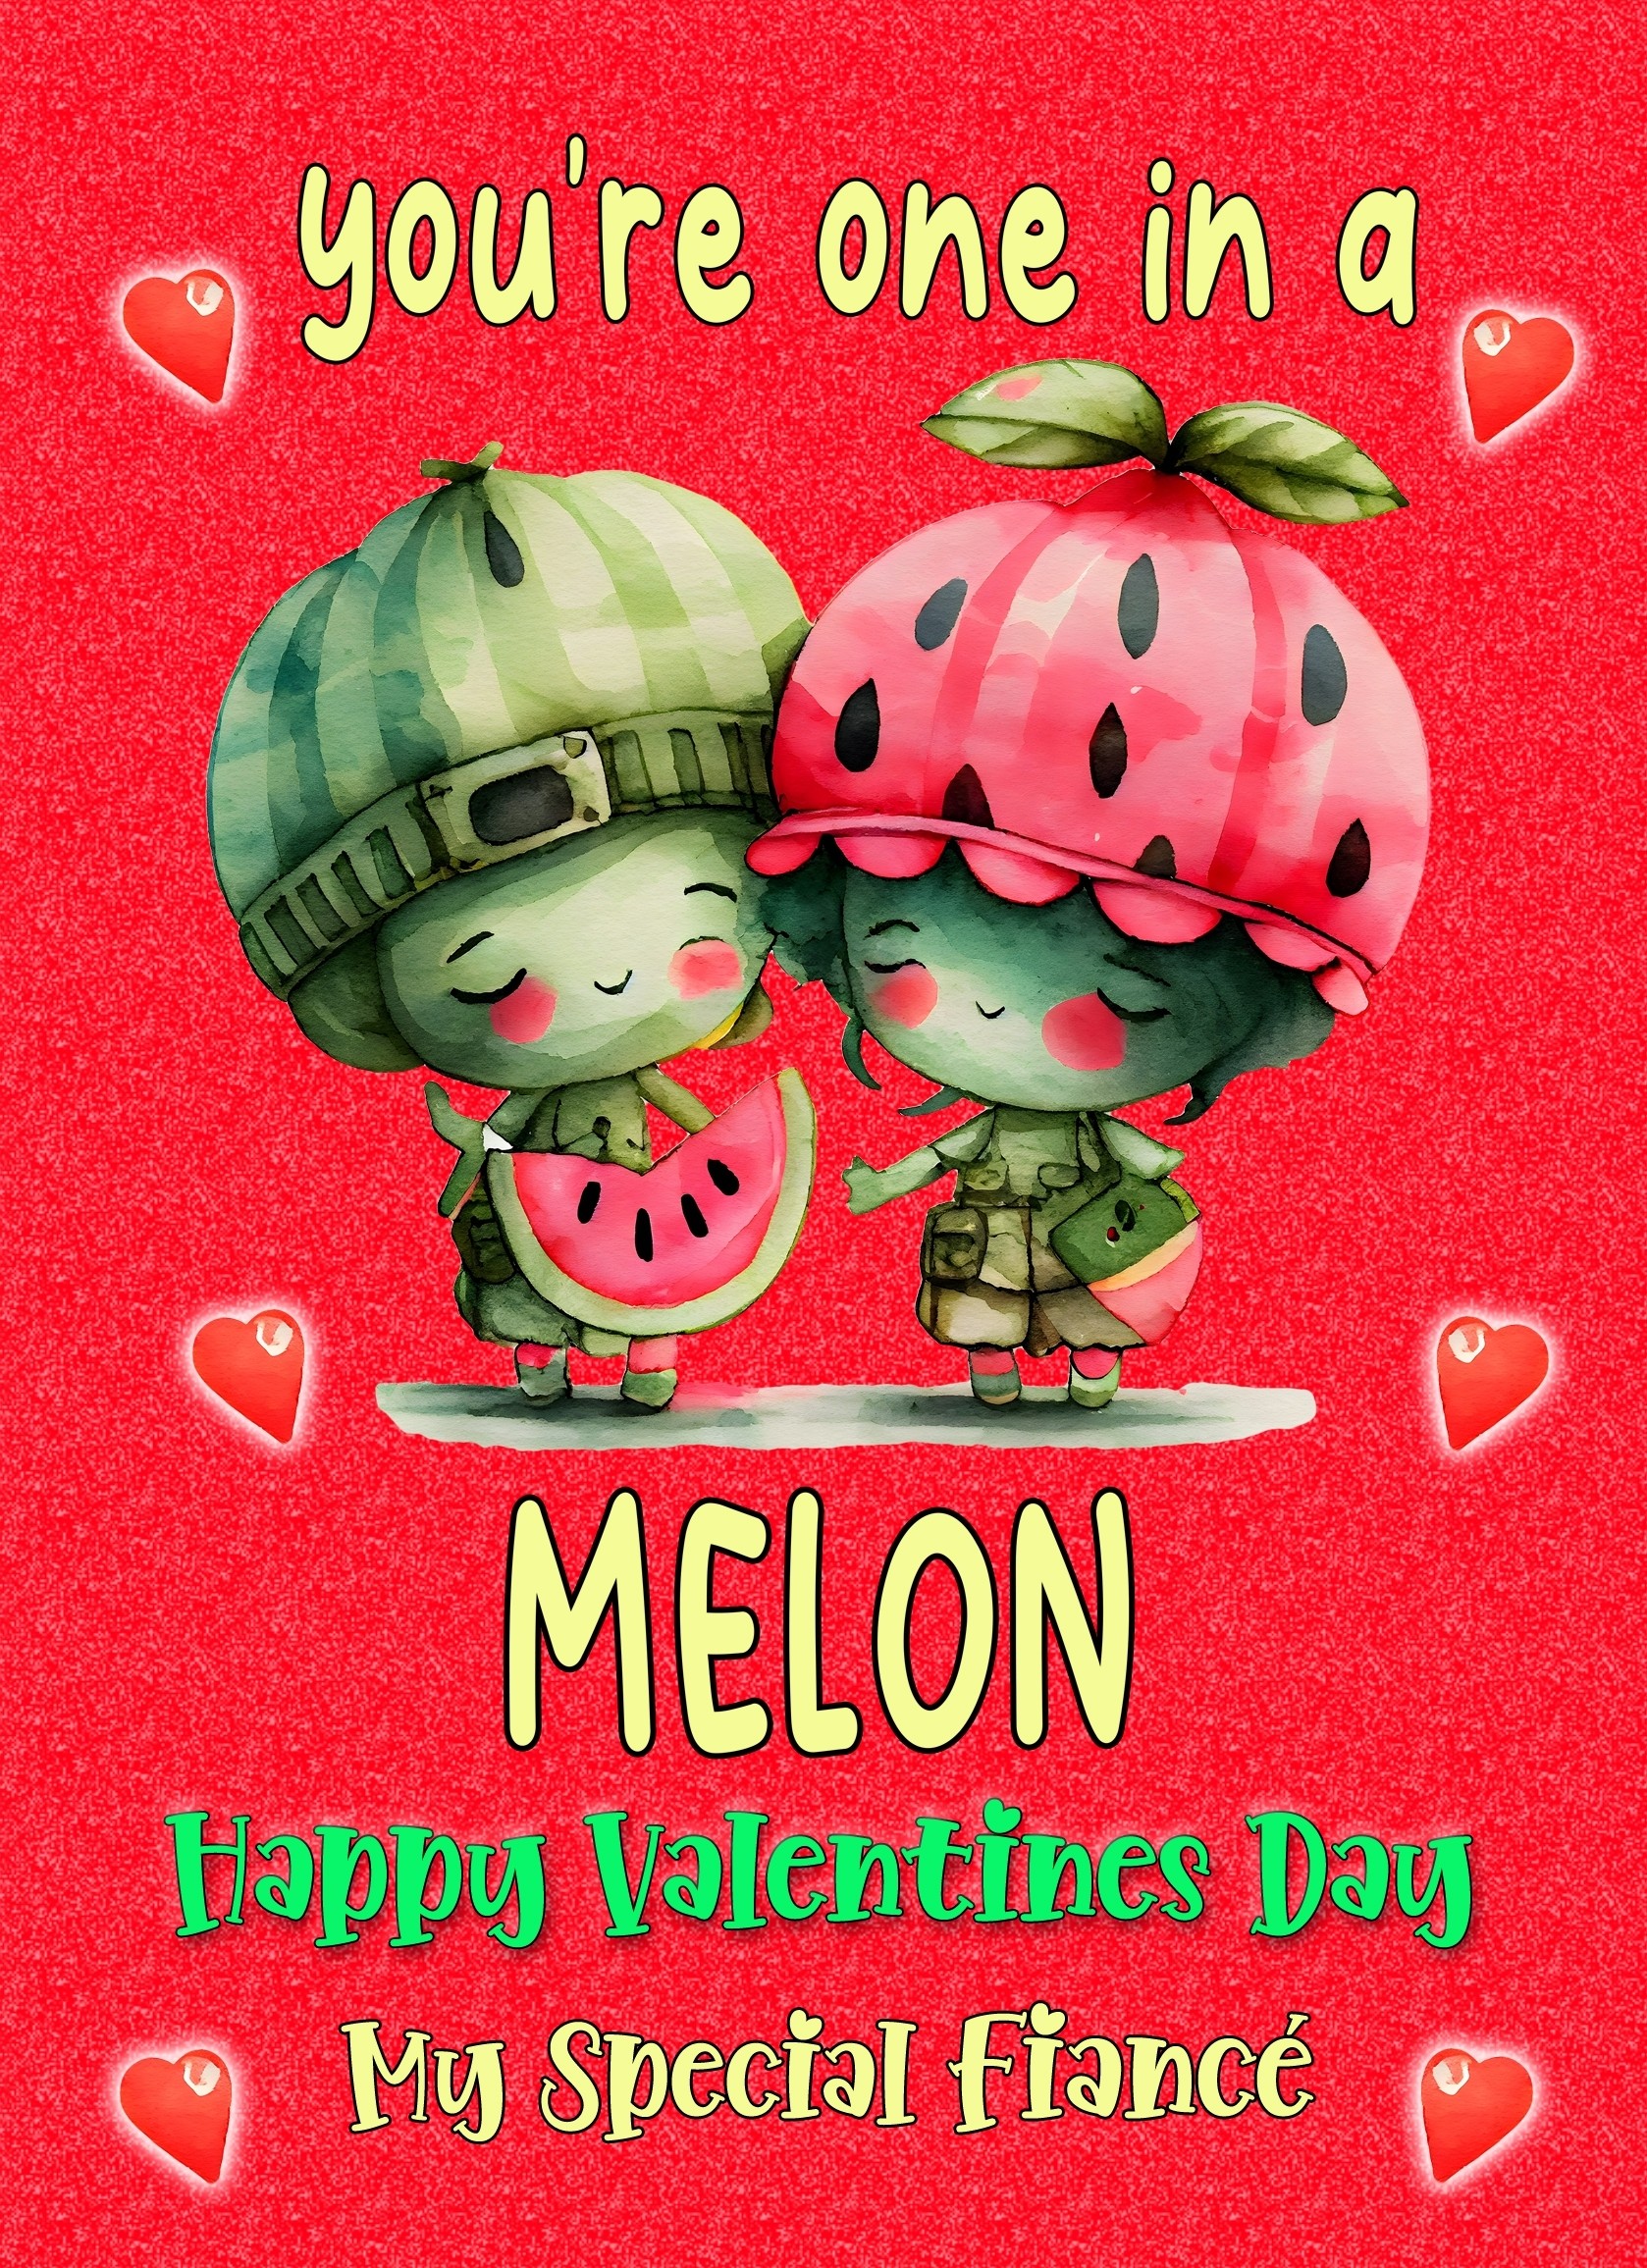 Funny Pun Valentines Day Card for Fiance (One in a Melon)